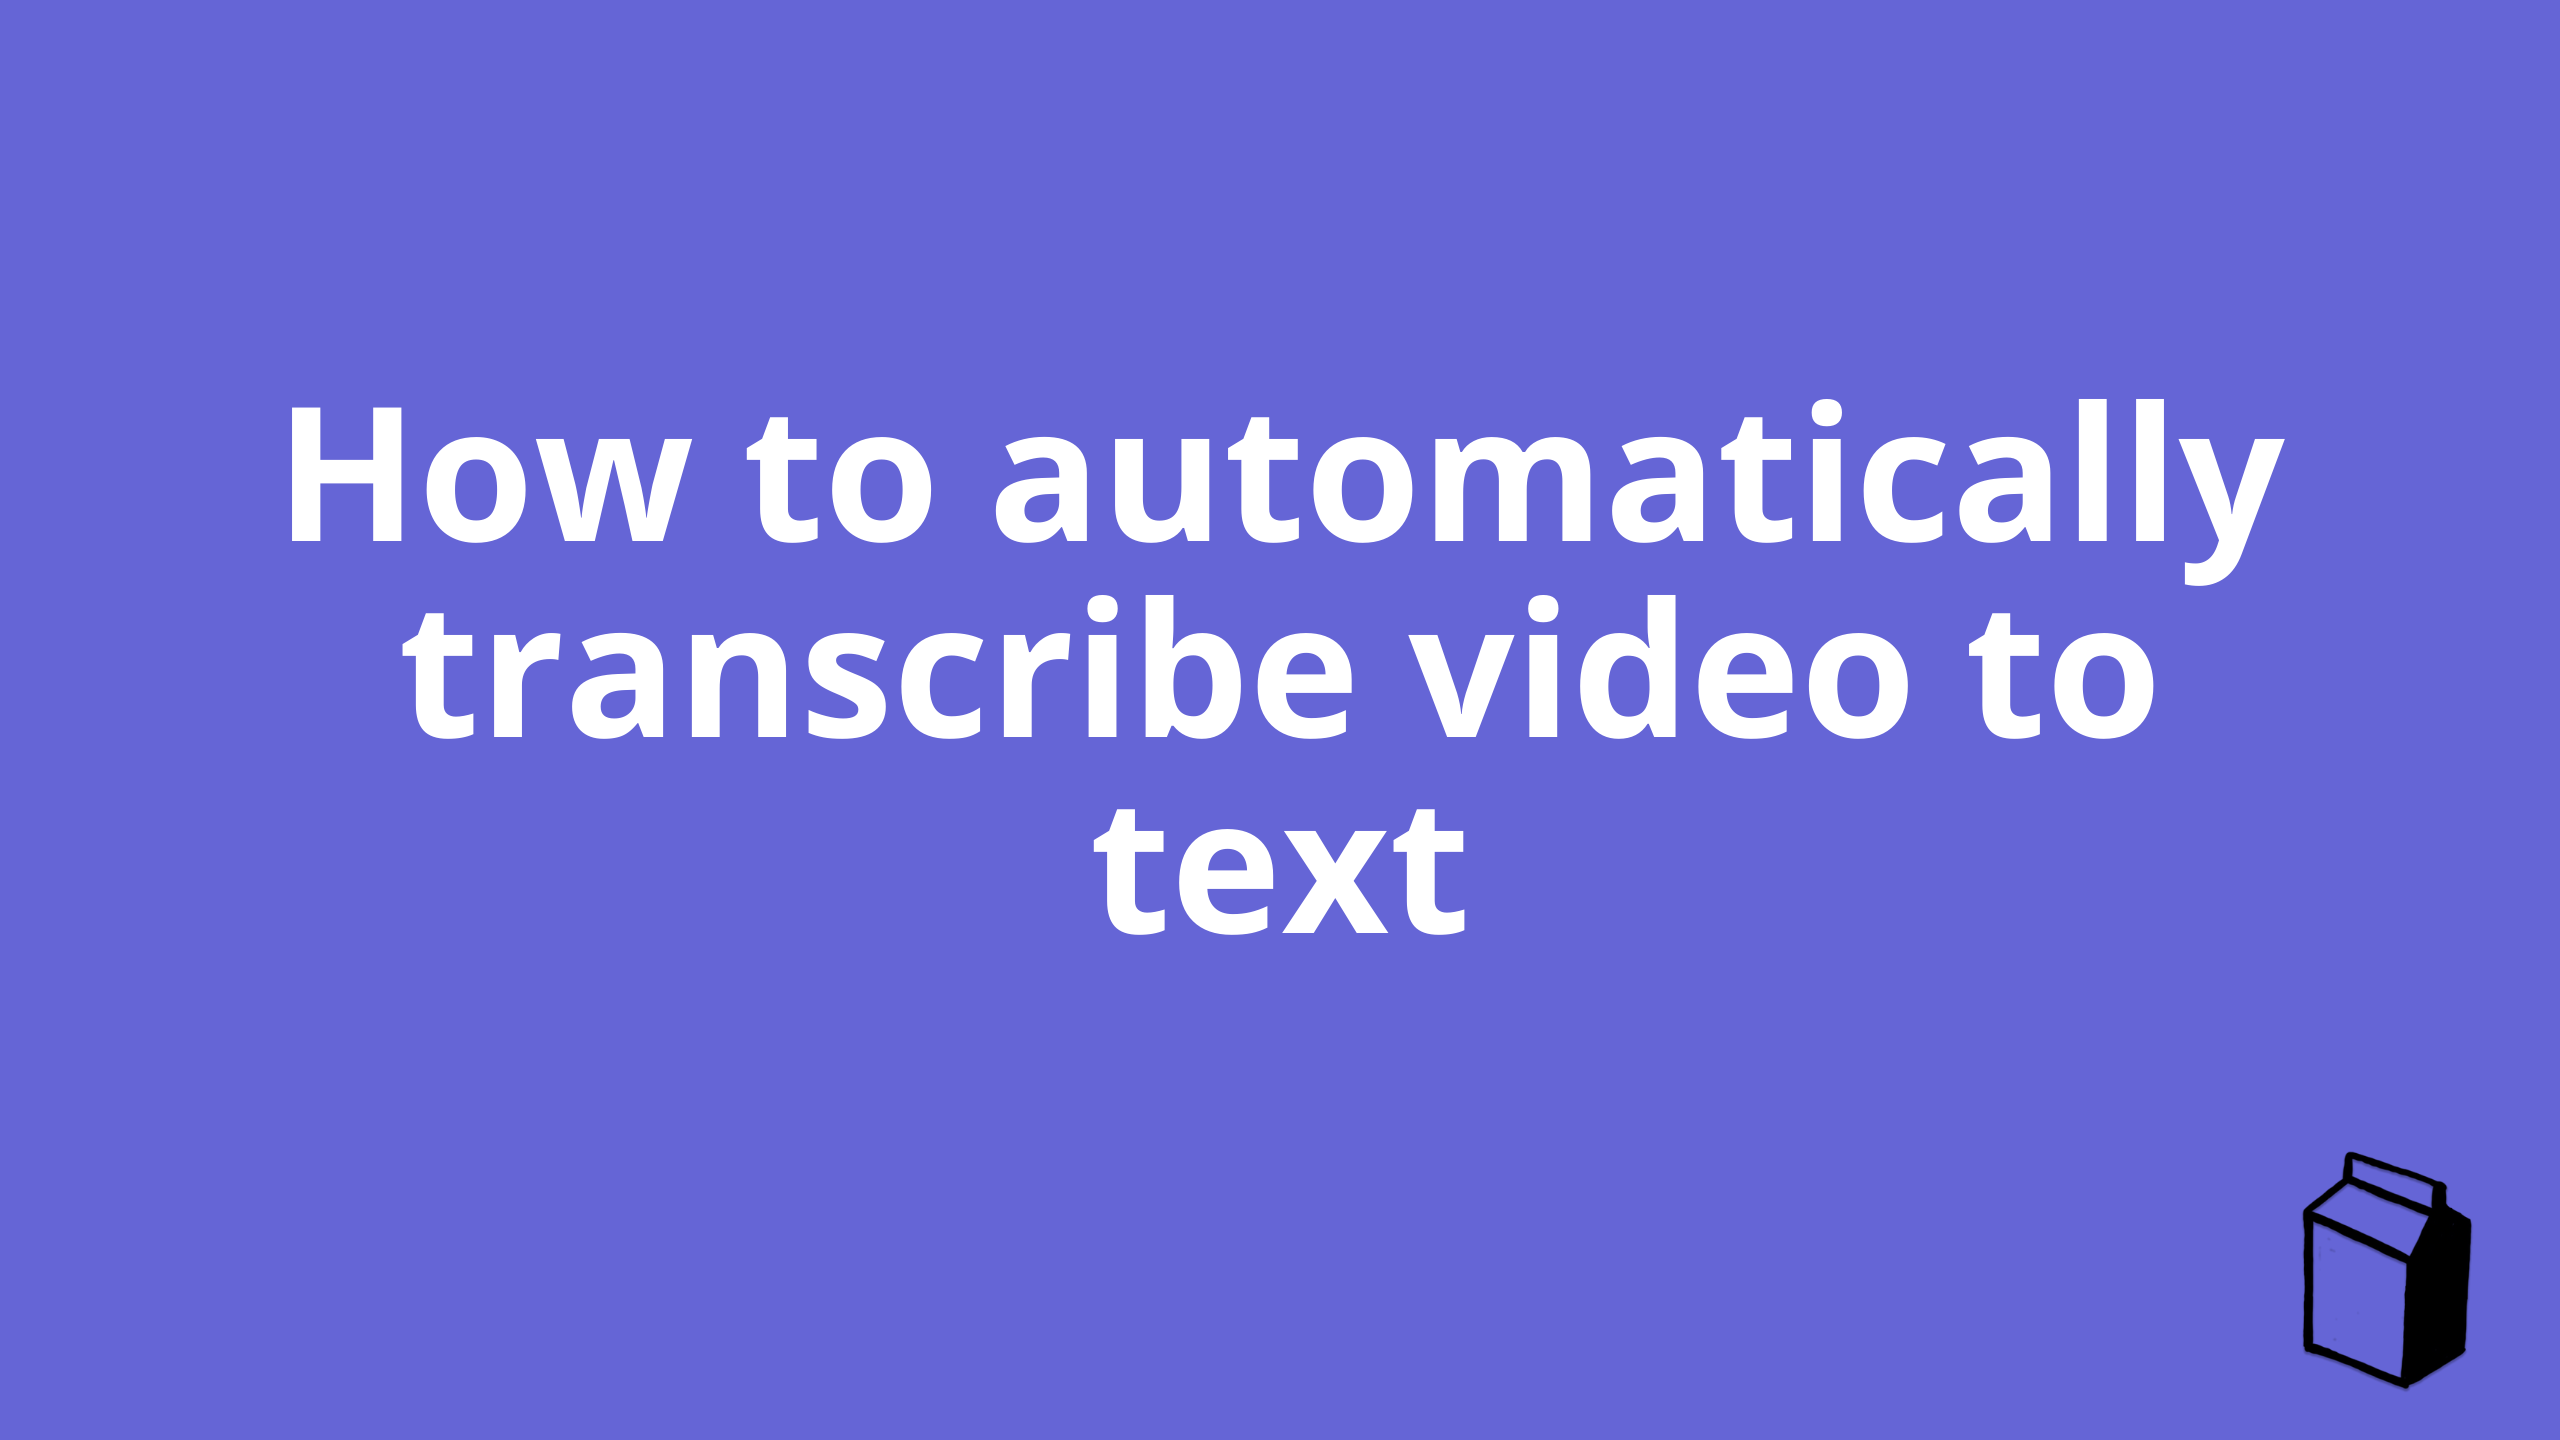 How to automatically transcribe video to text